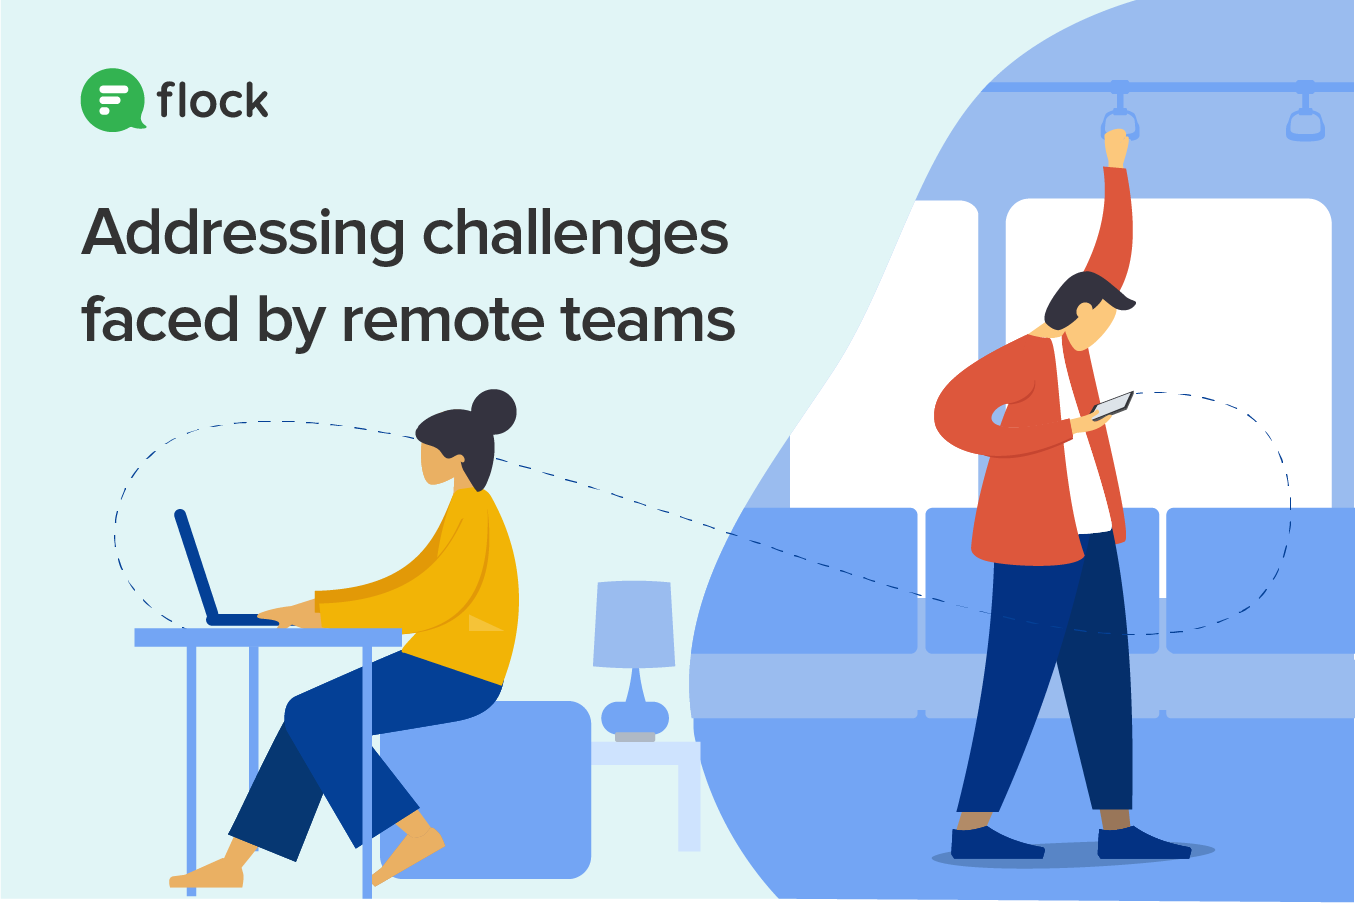 Addressing challenges faced by remote teams